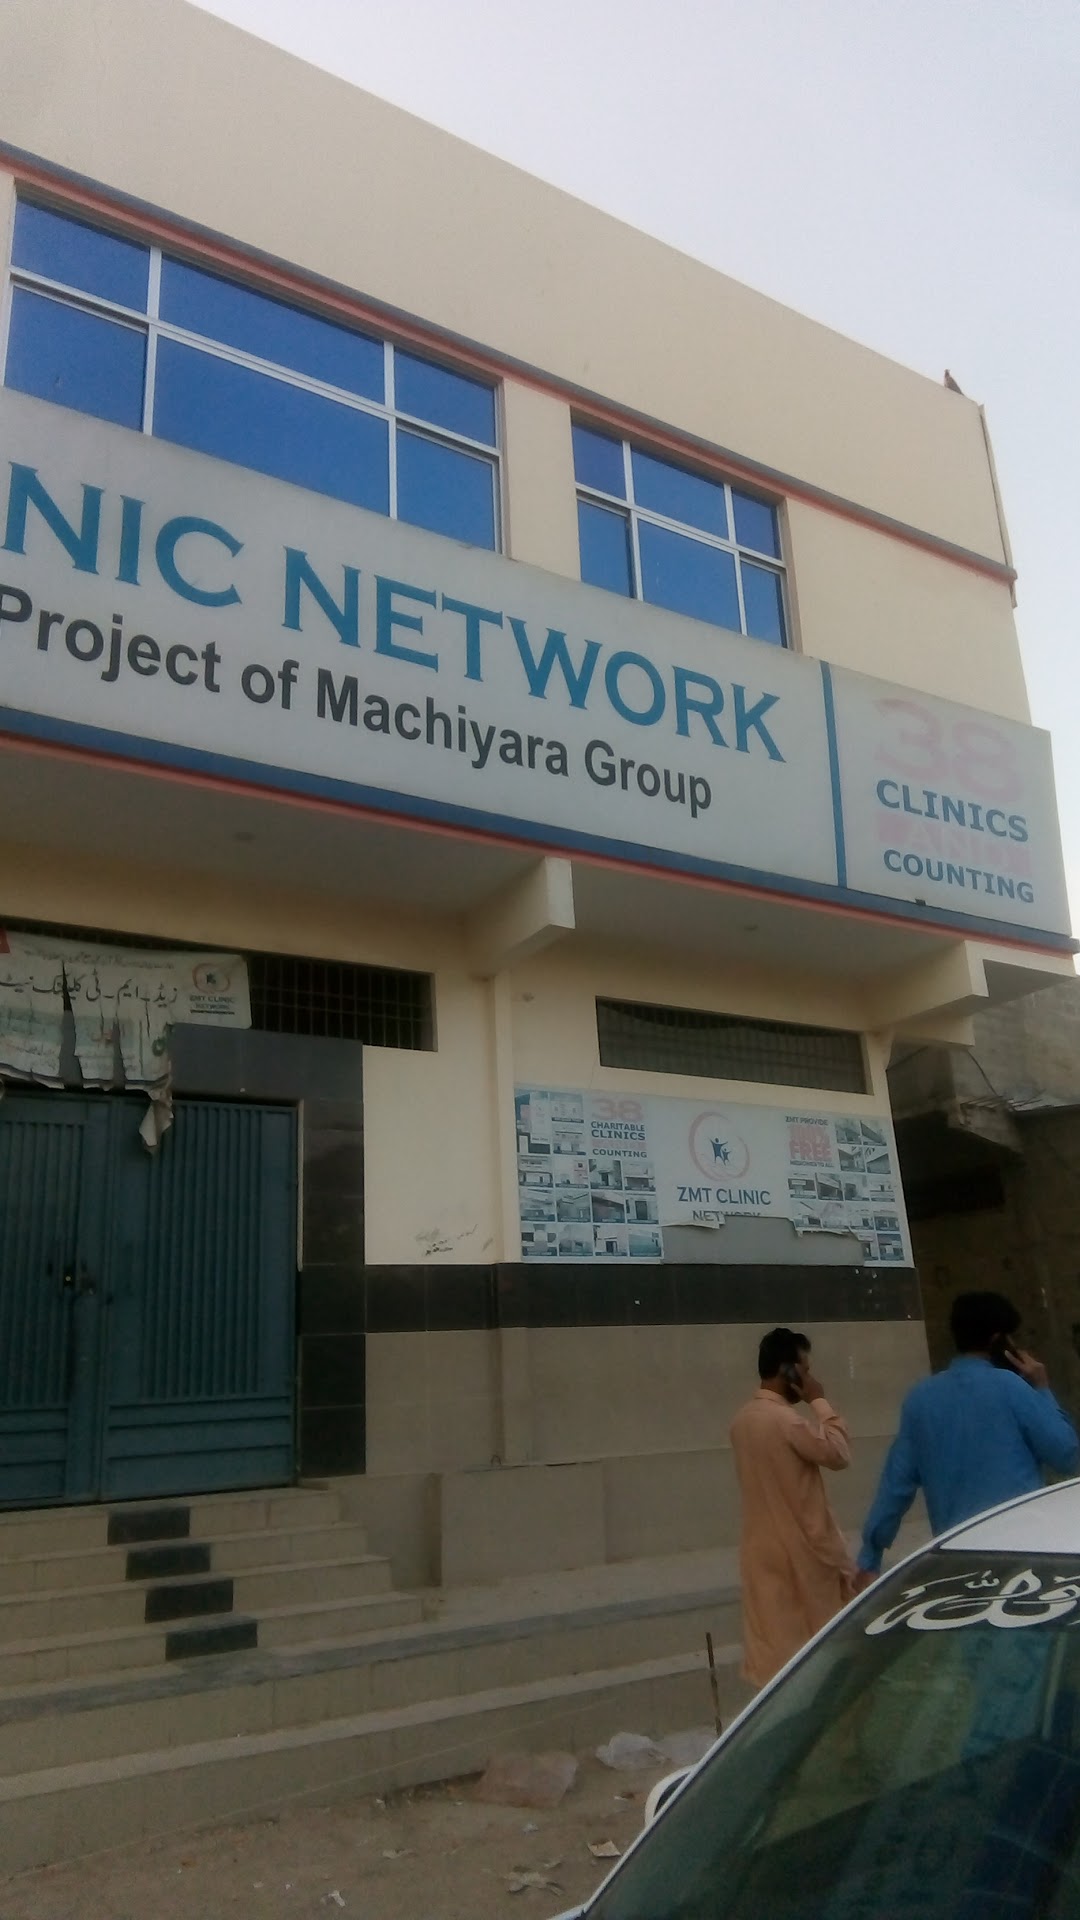 ZMT Clinic Network